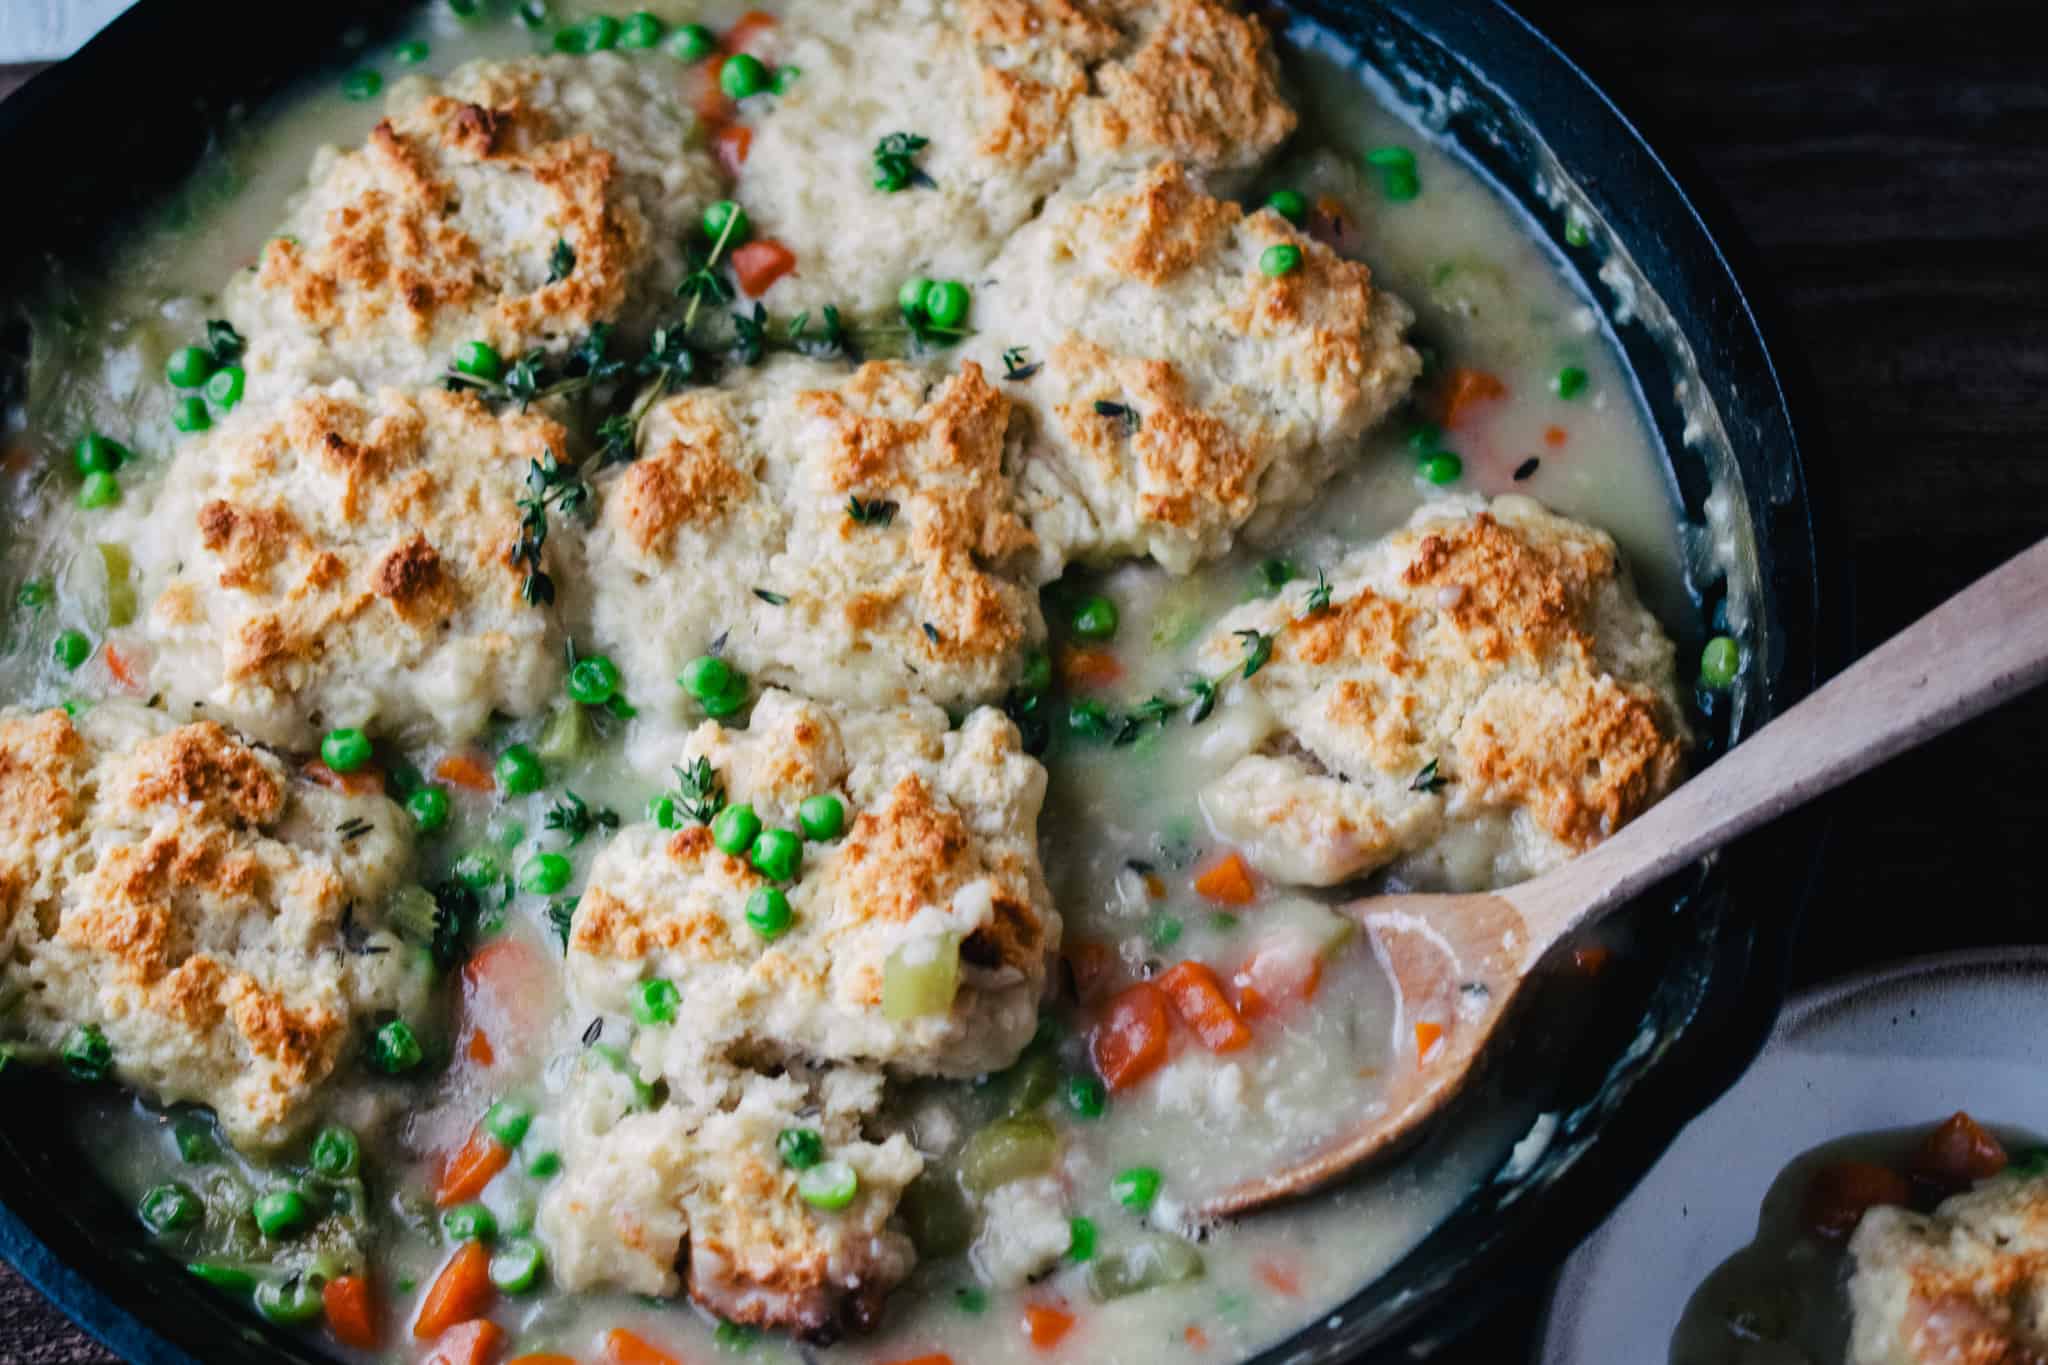 cast iron skillet filled with creamy chicken and dumplings with a wooden spoon on a wooden surface